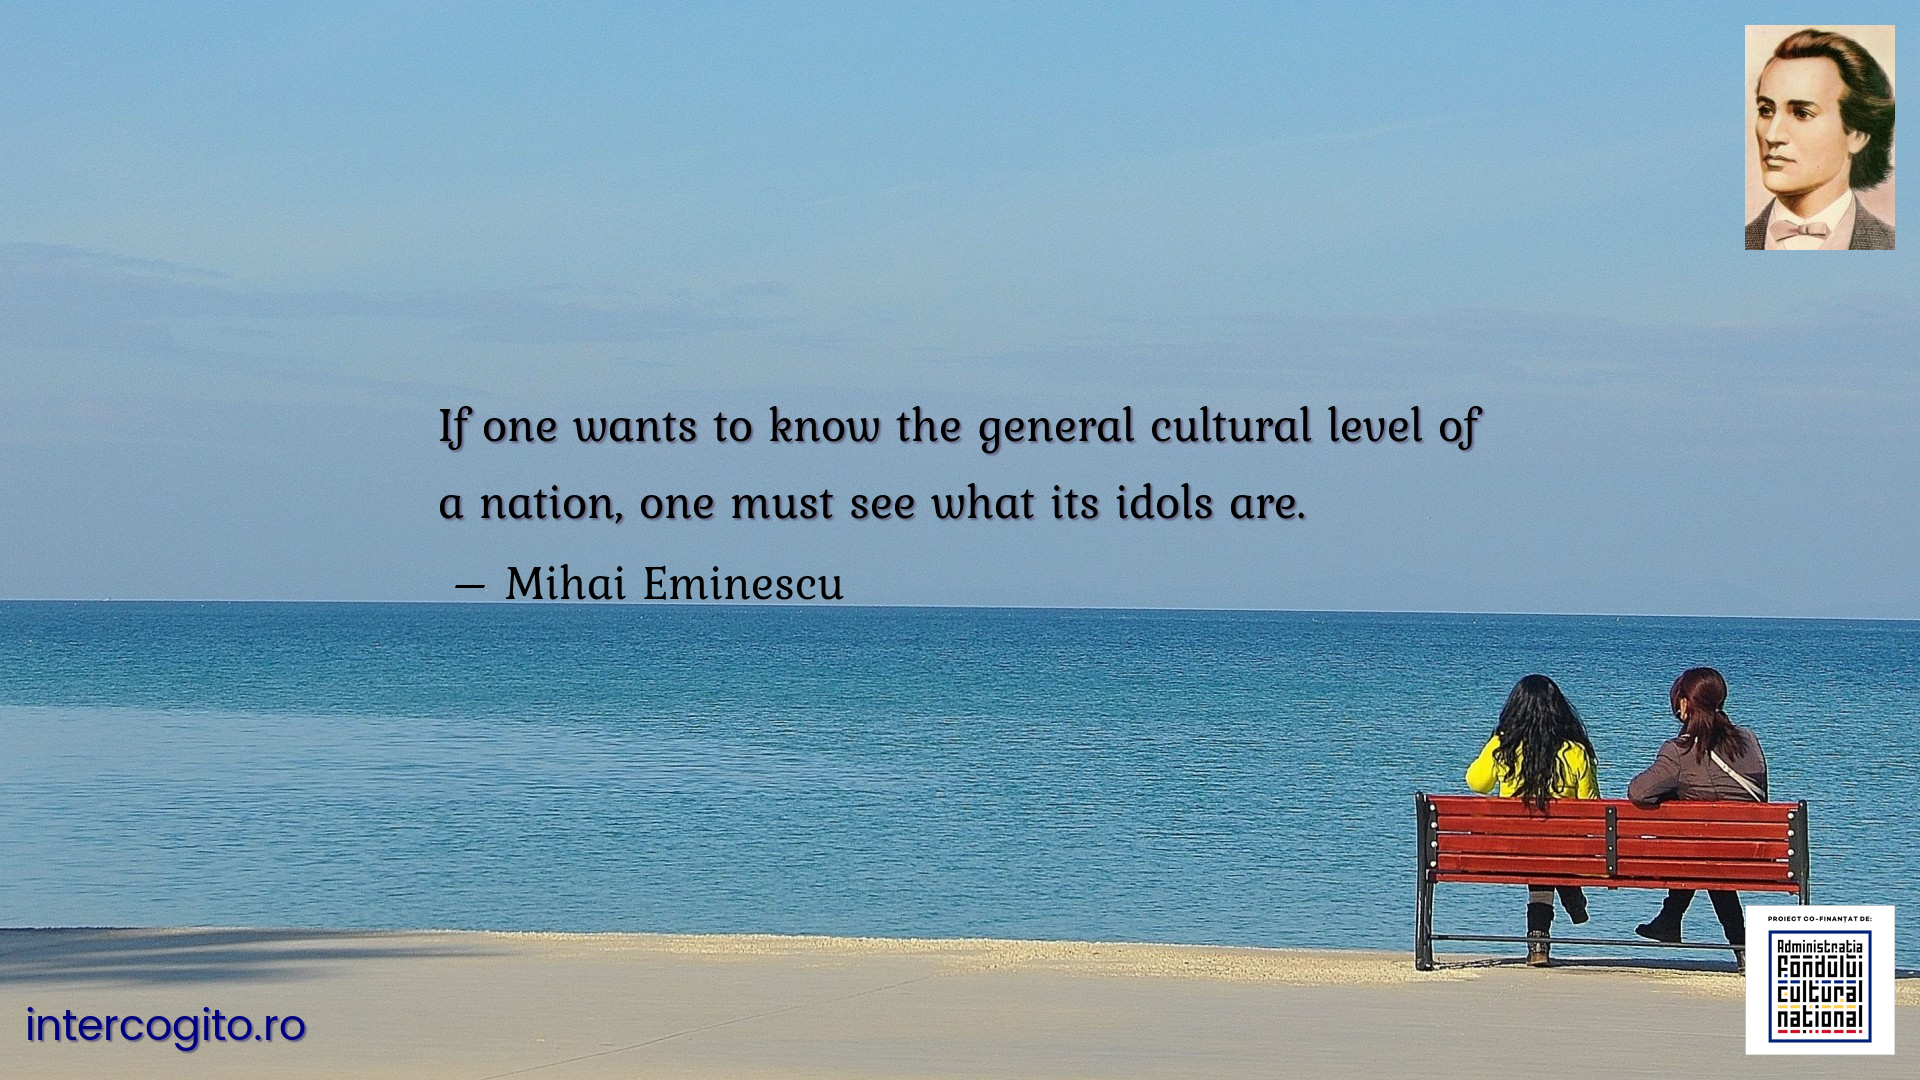 If one wants to know the general cultural level of a nation, one must see what its idols are.